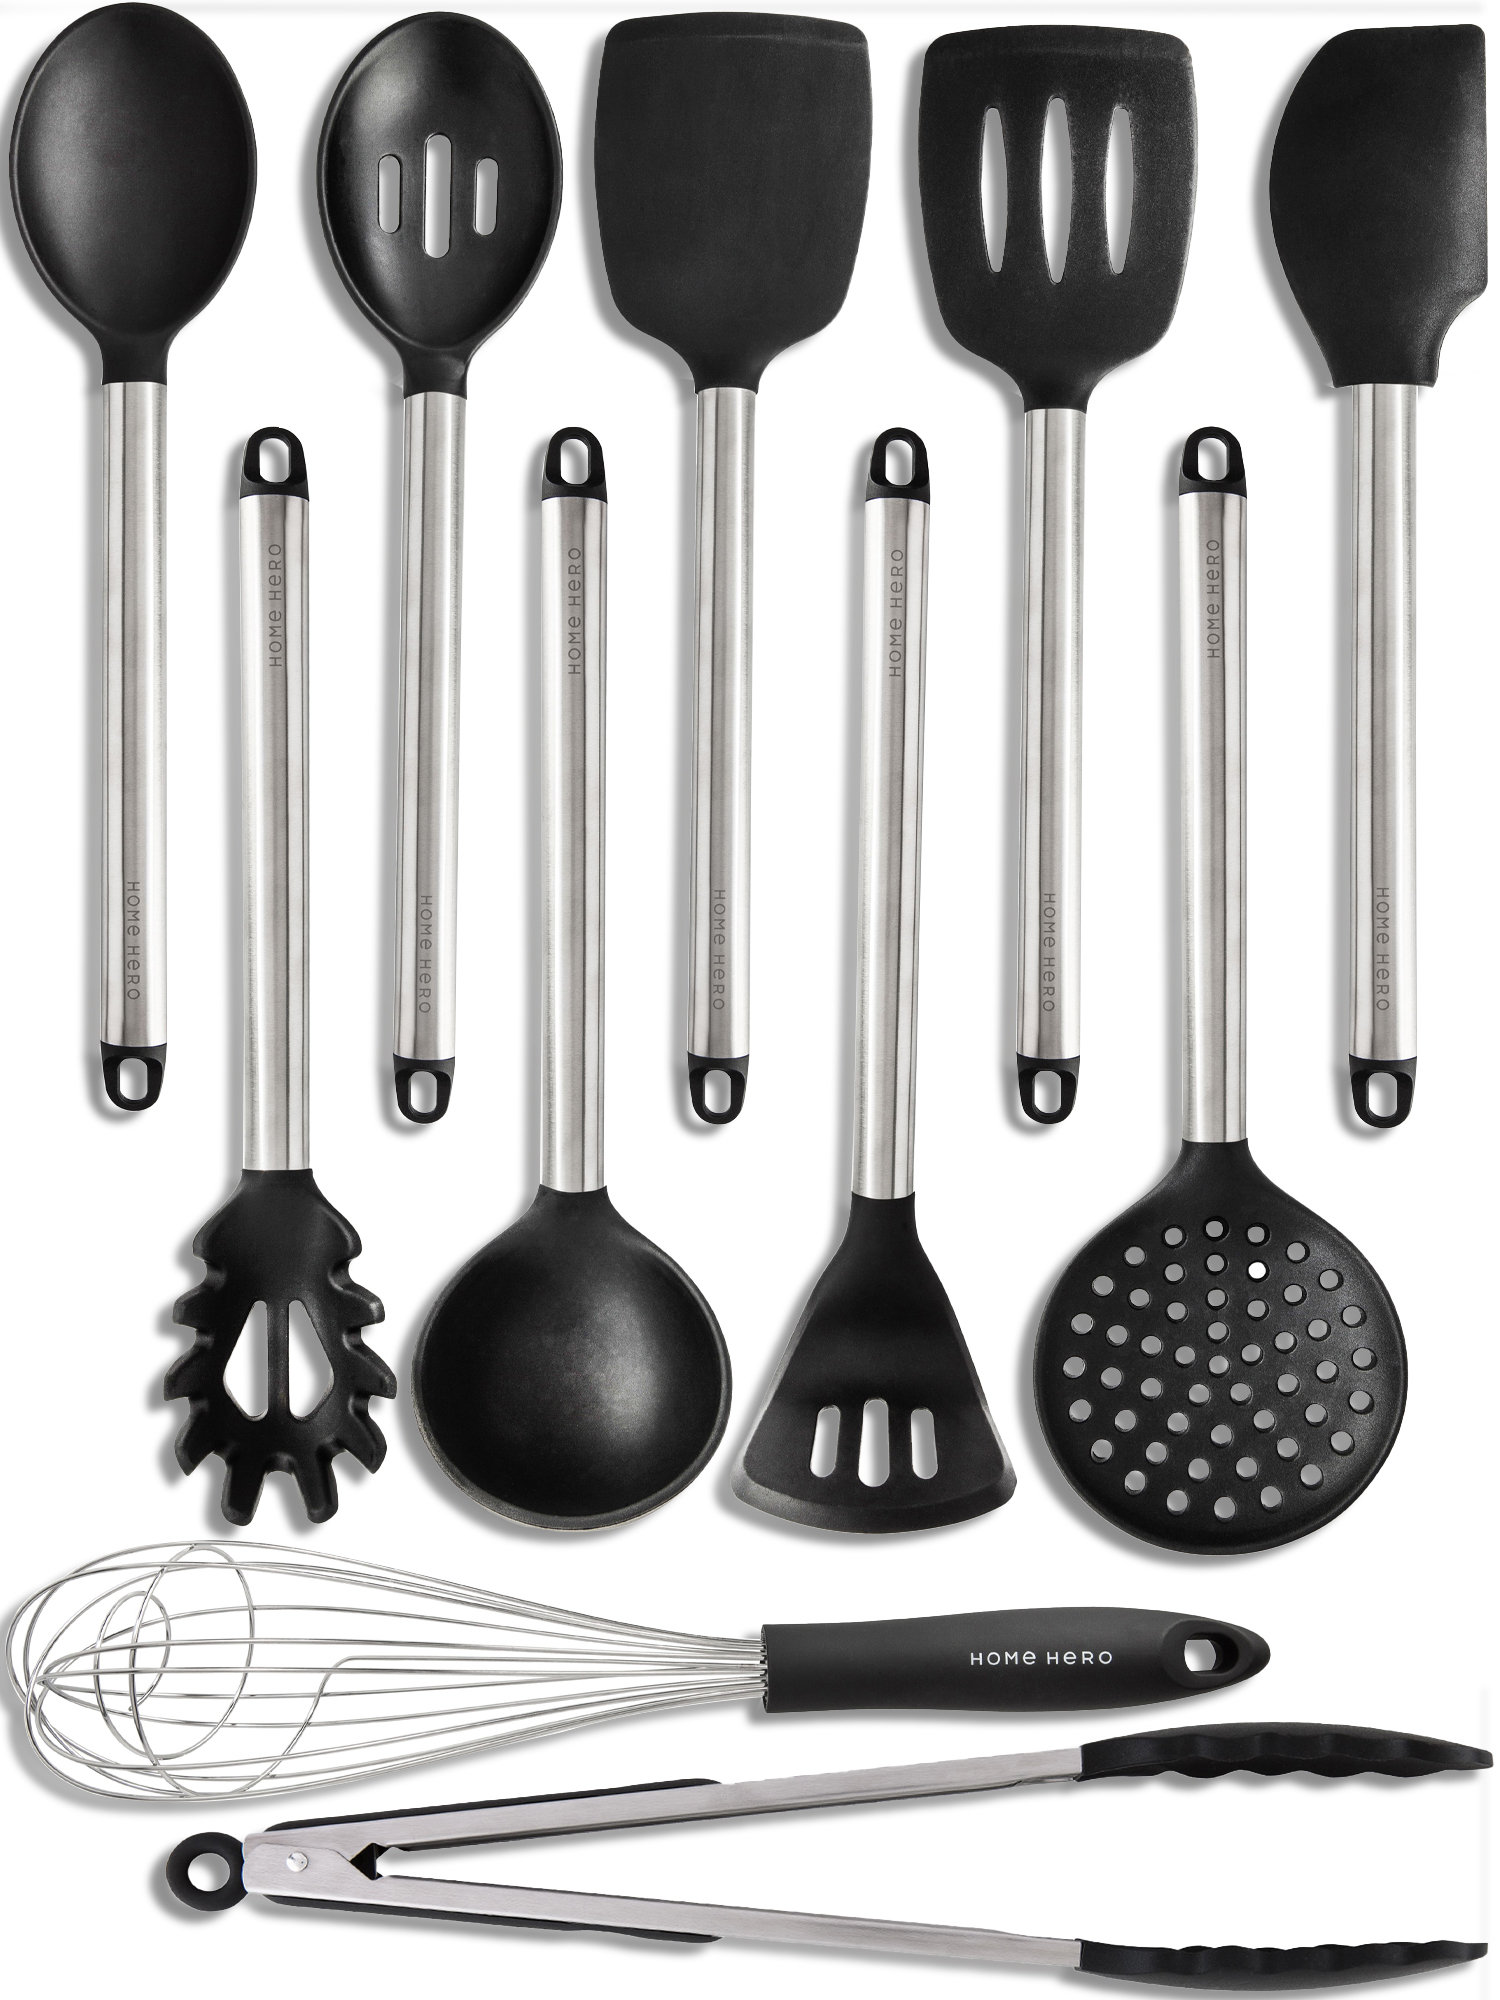 Home Hero 11-pcs Silicone Kitchen Utensils Set - Silicone Cooking